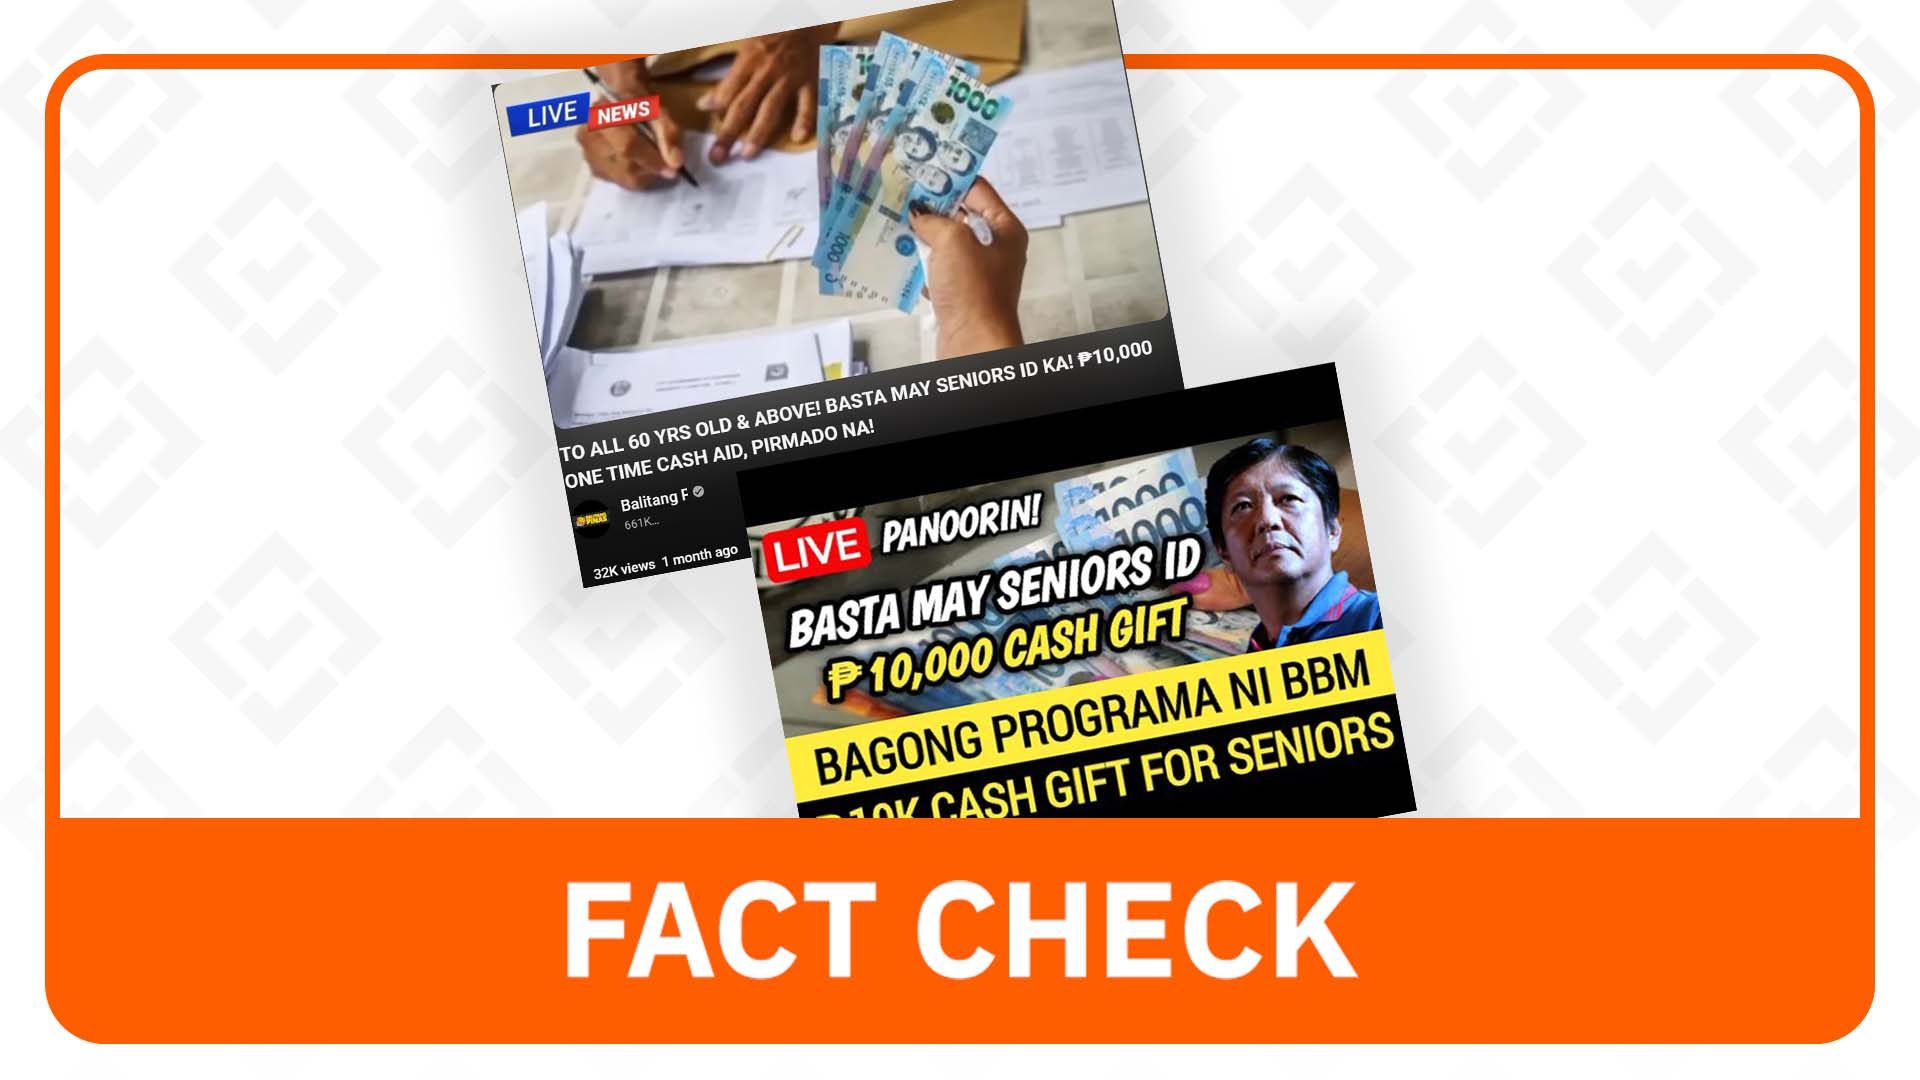 FACT CHECK: No P10,000 cash aid for all senior citizens from DSWD